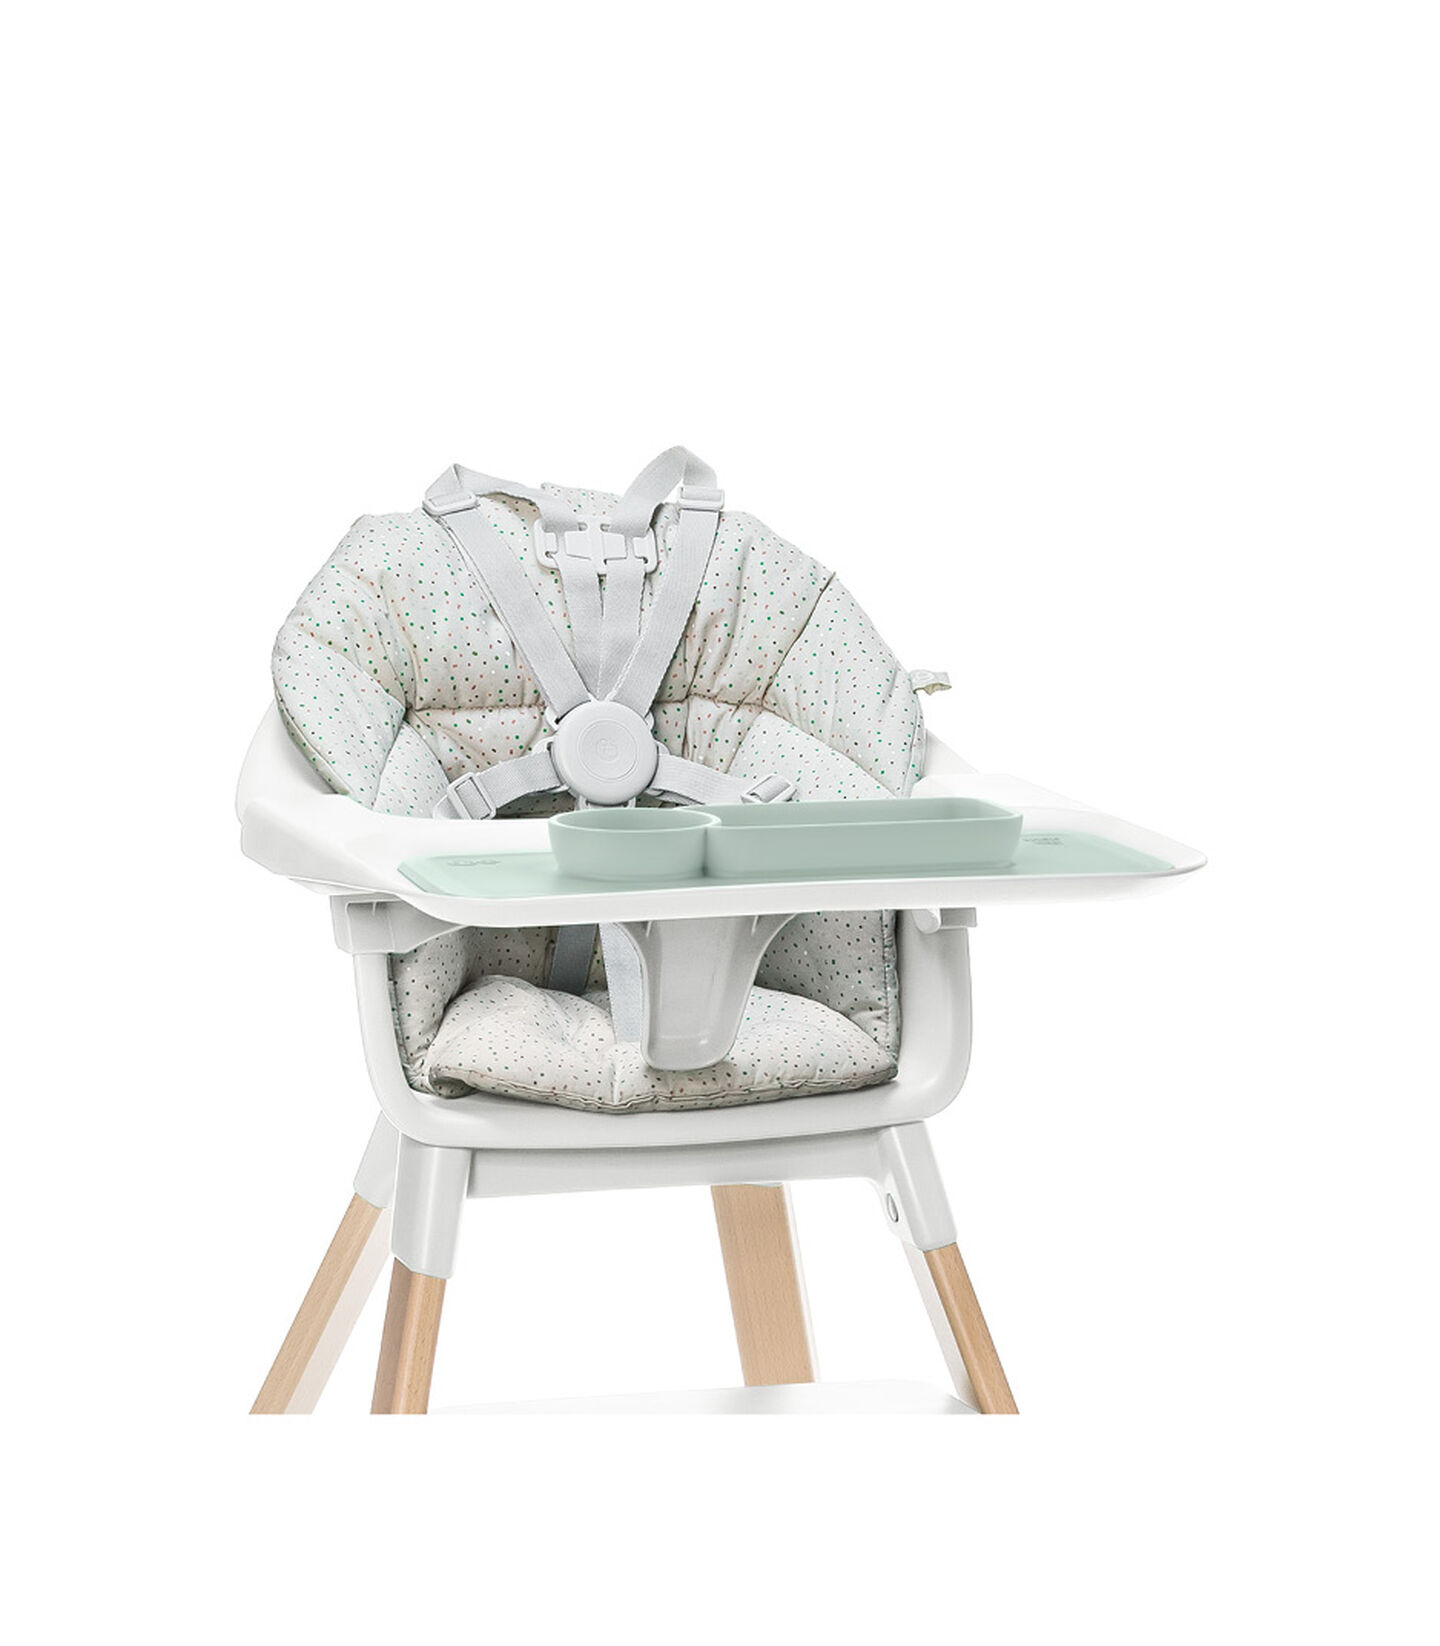 ezpz™ by Stokke™ placemat for Clikk™ Tray Soft Mint, Мятно-зелёный, mainview view 3